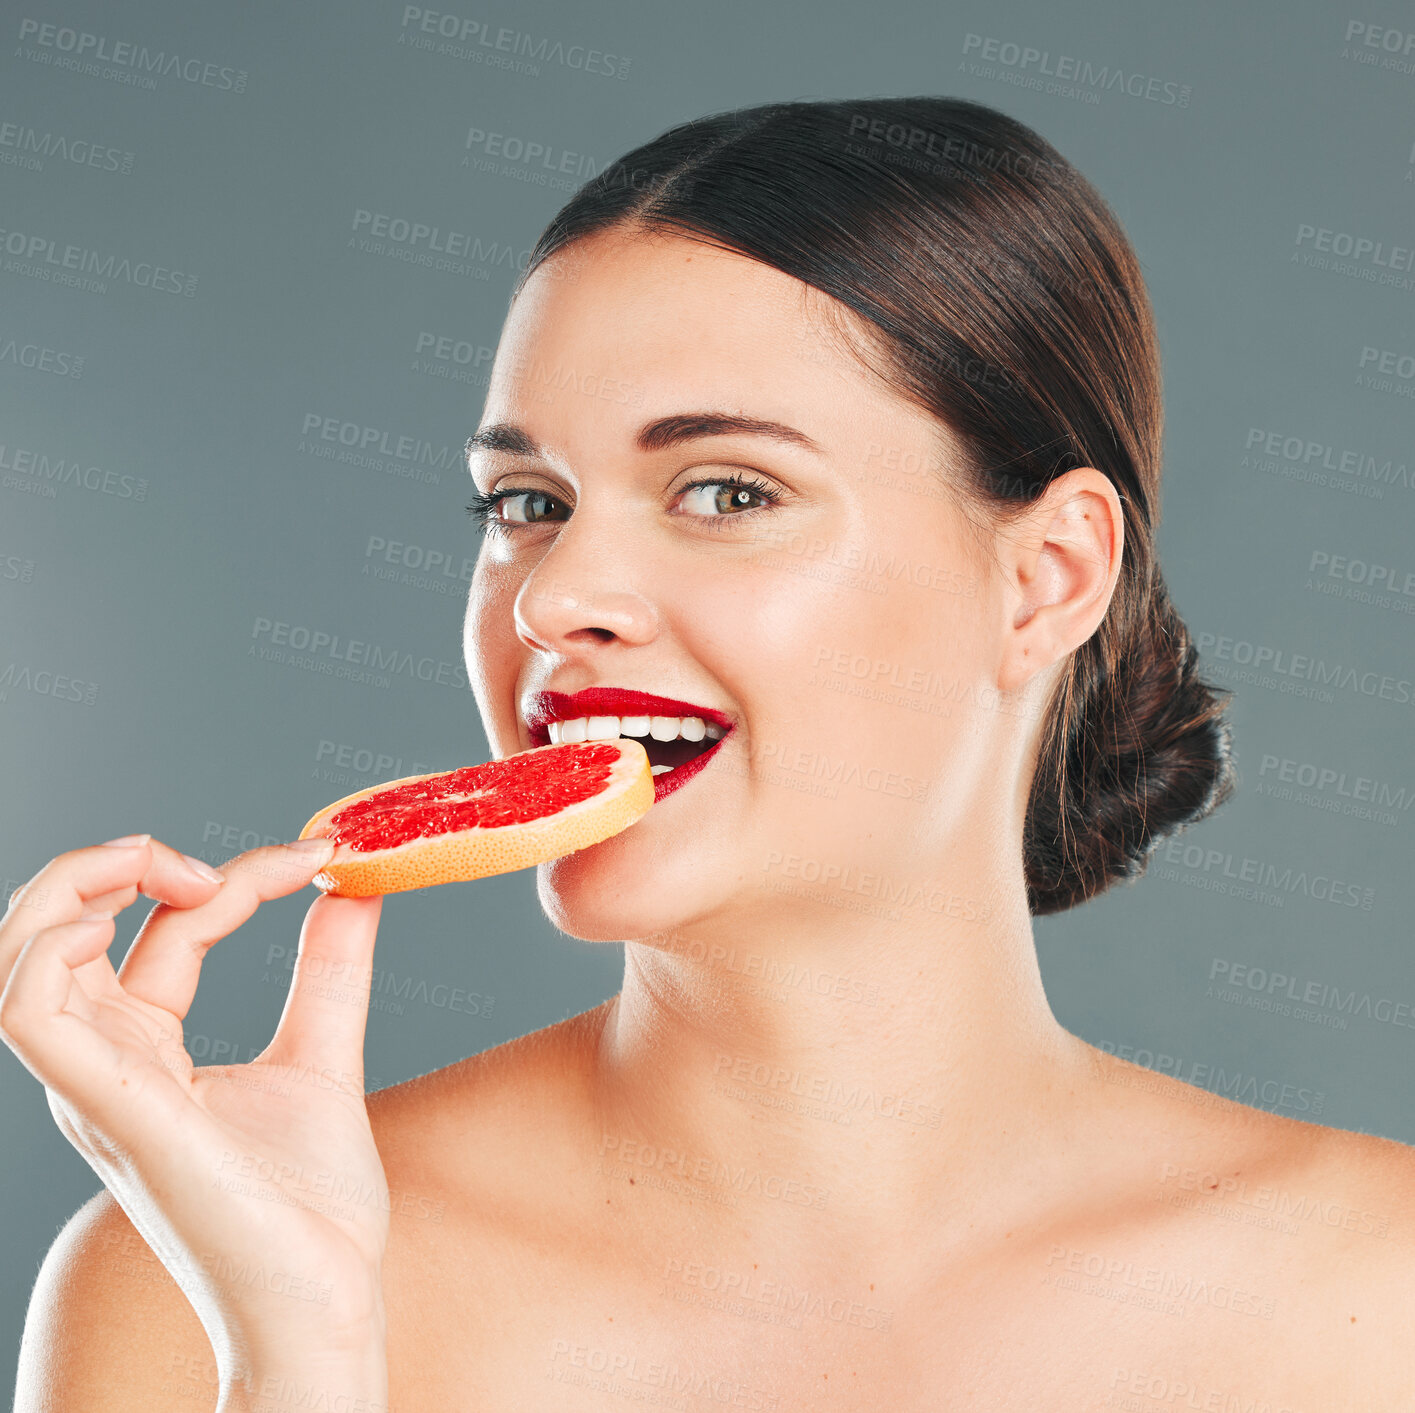 Buy stock photo Fruit bite, portrait and woman eating a grapefruit for nature and wellness aesthetic in a studio. Model, beauty and natural skincare of a young person with red lipstick hungry for vitamin c nutrition